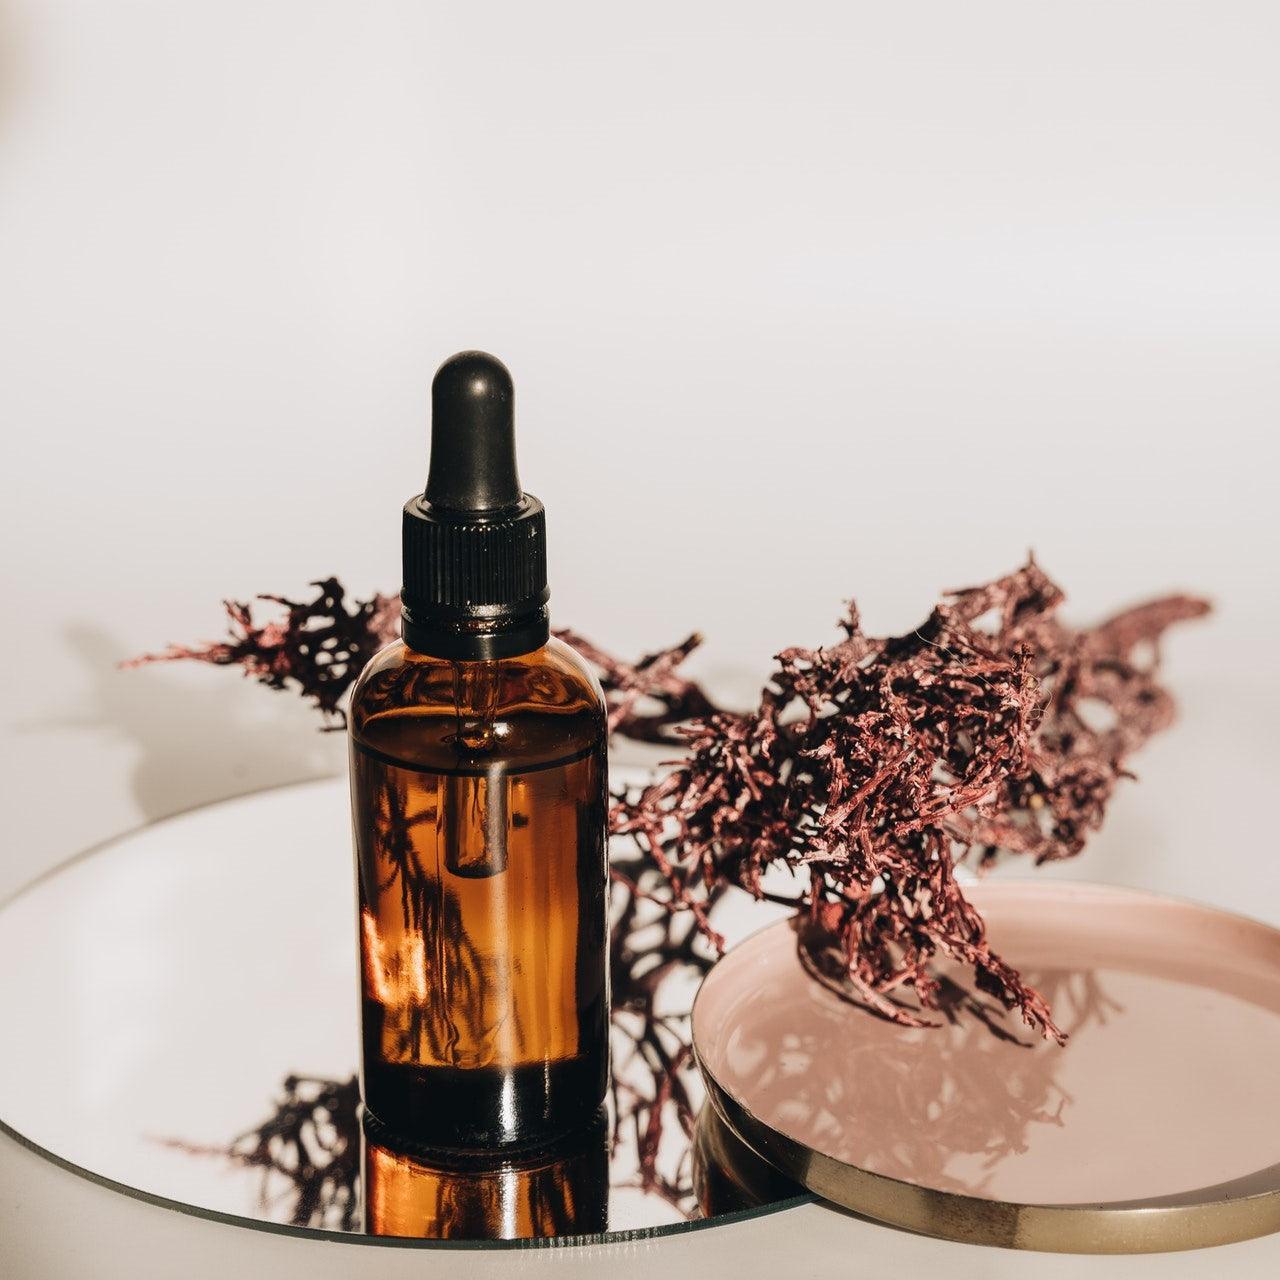 Why should you include facial oils in your skincare routine?